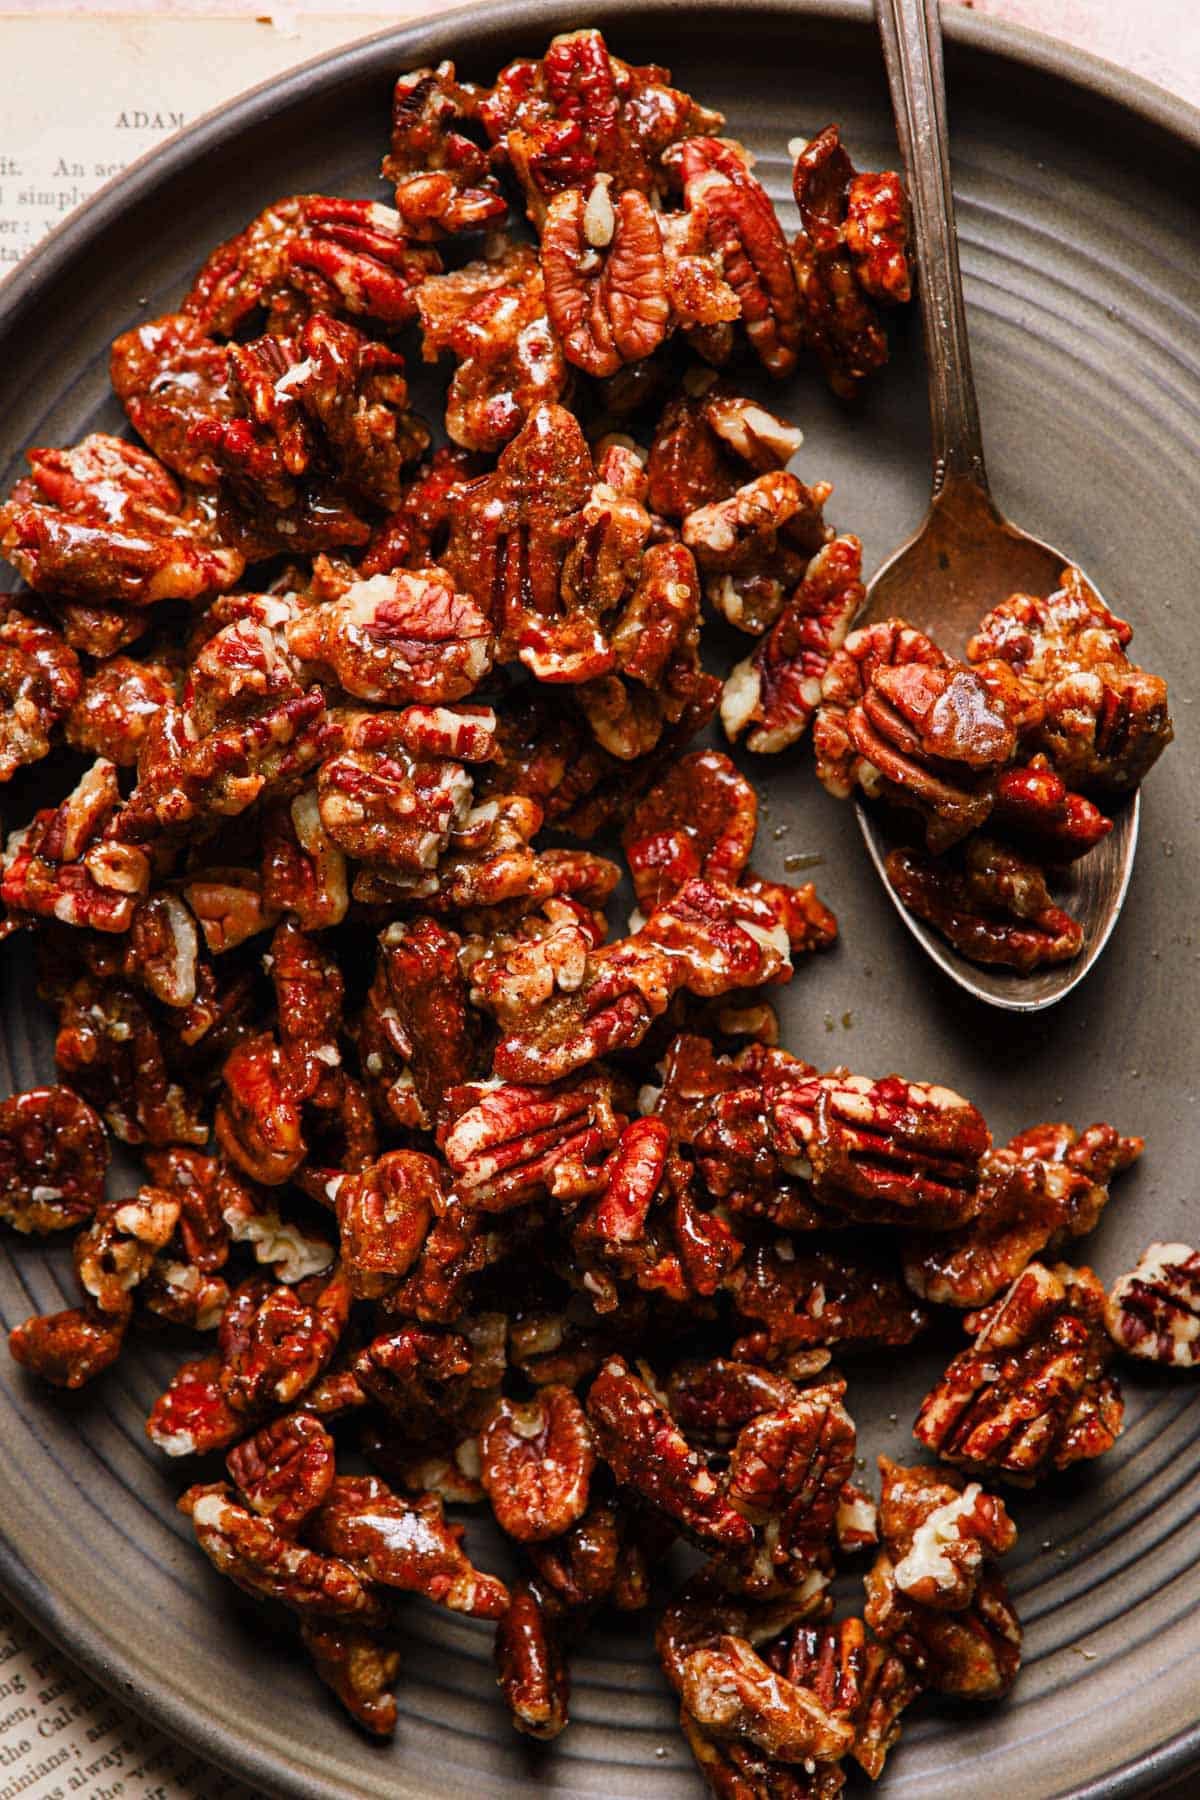 Caramelized pecans on a plate